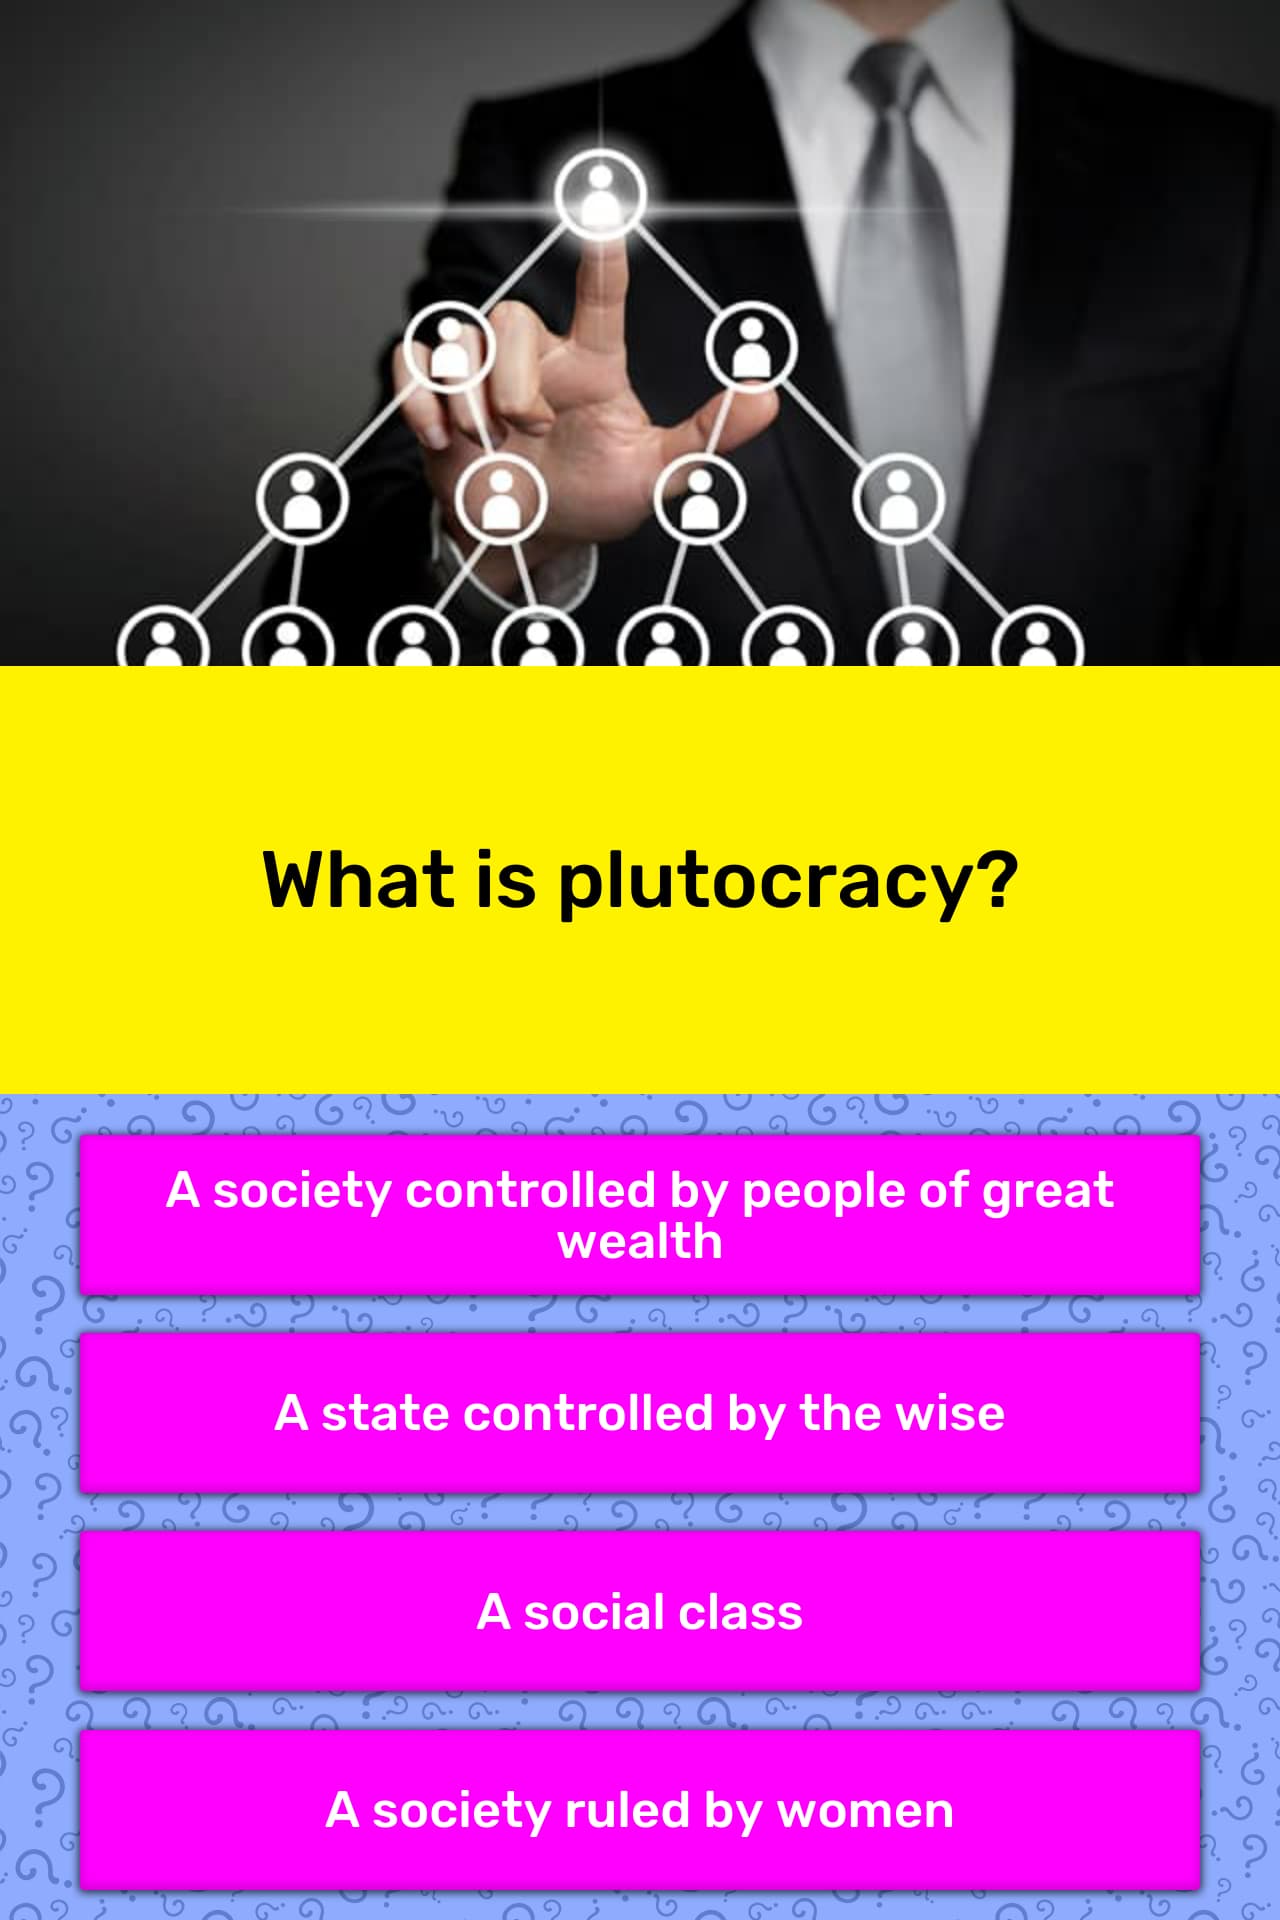 plutocracy defined